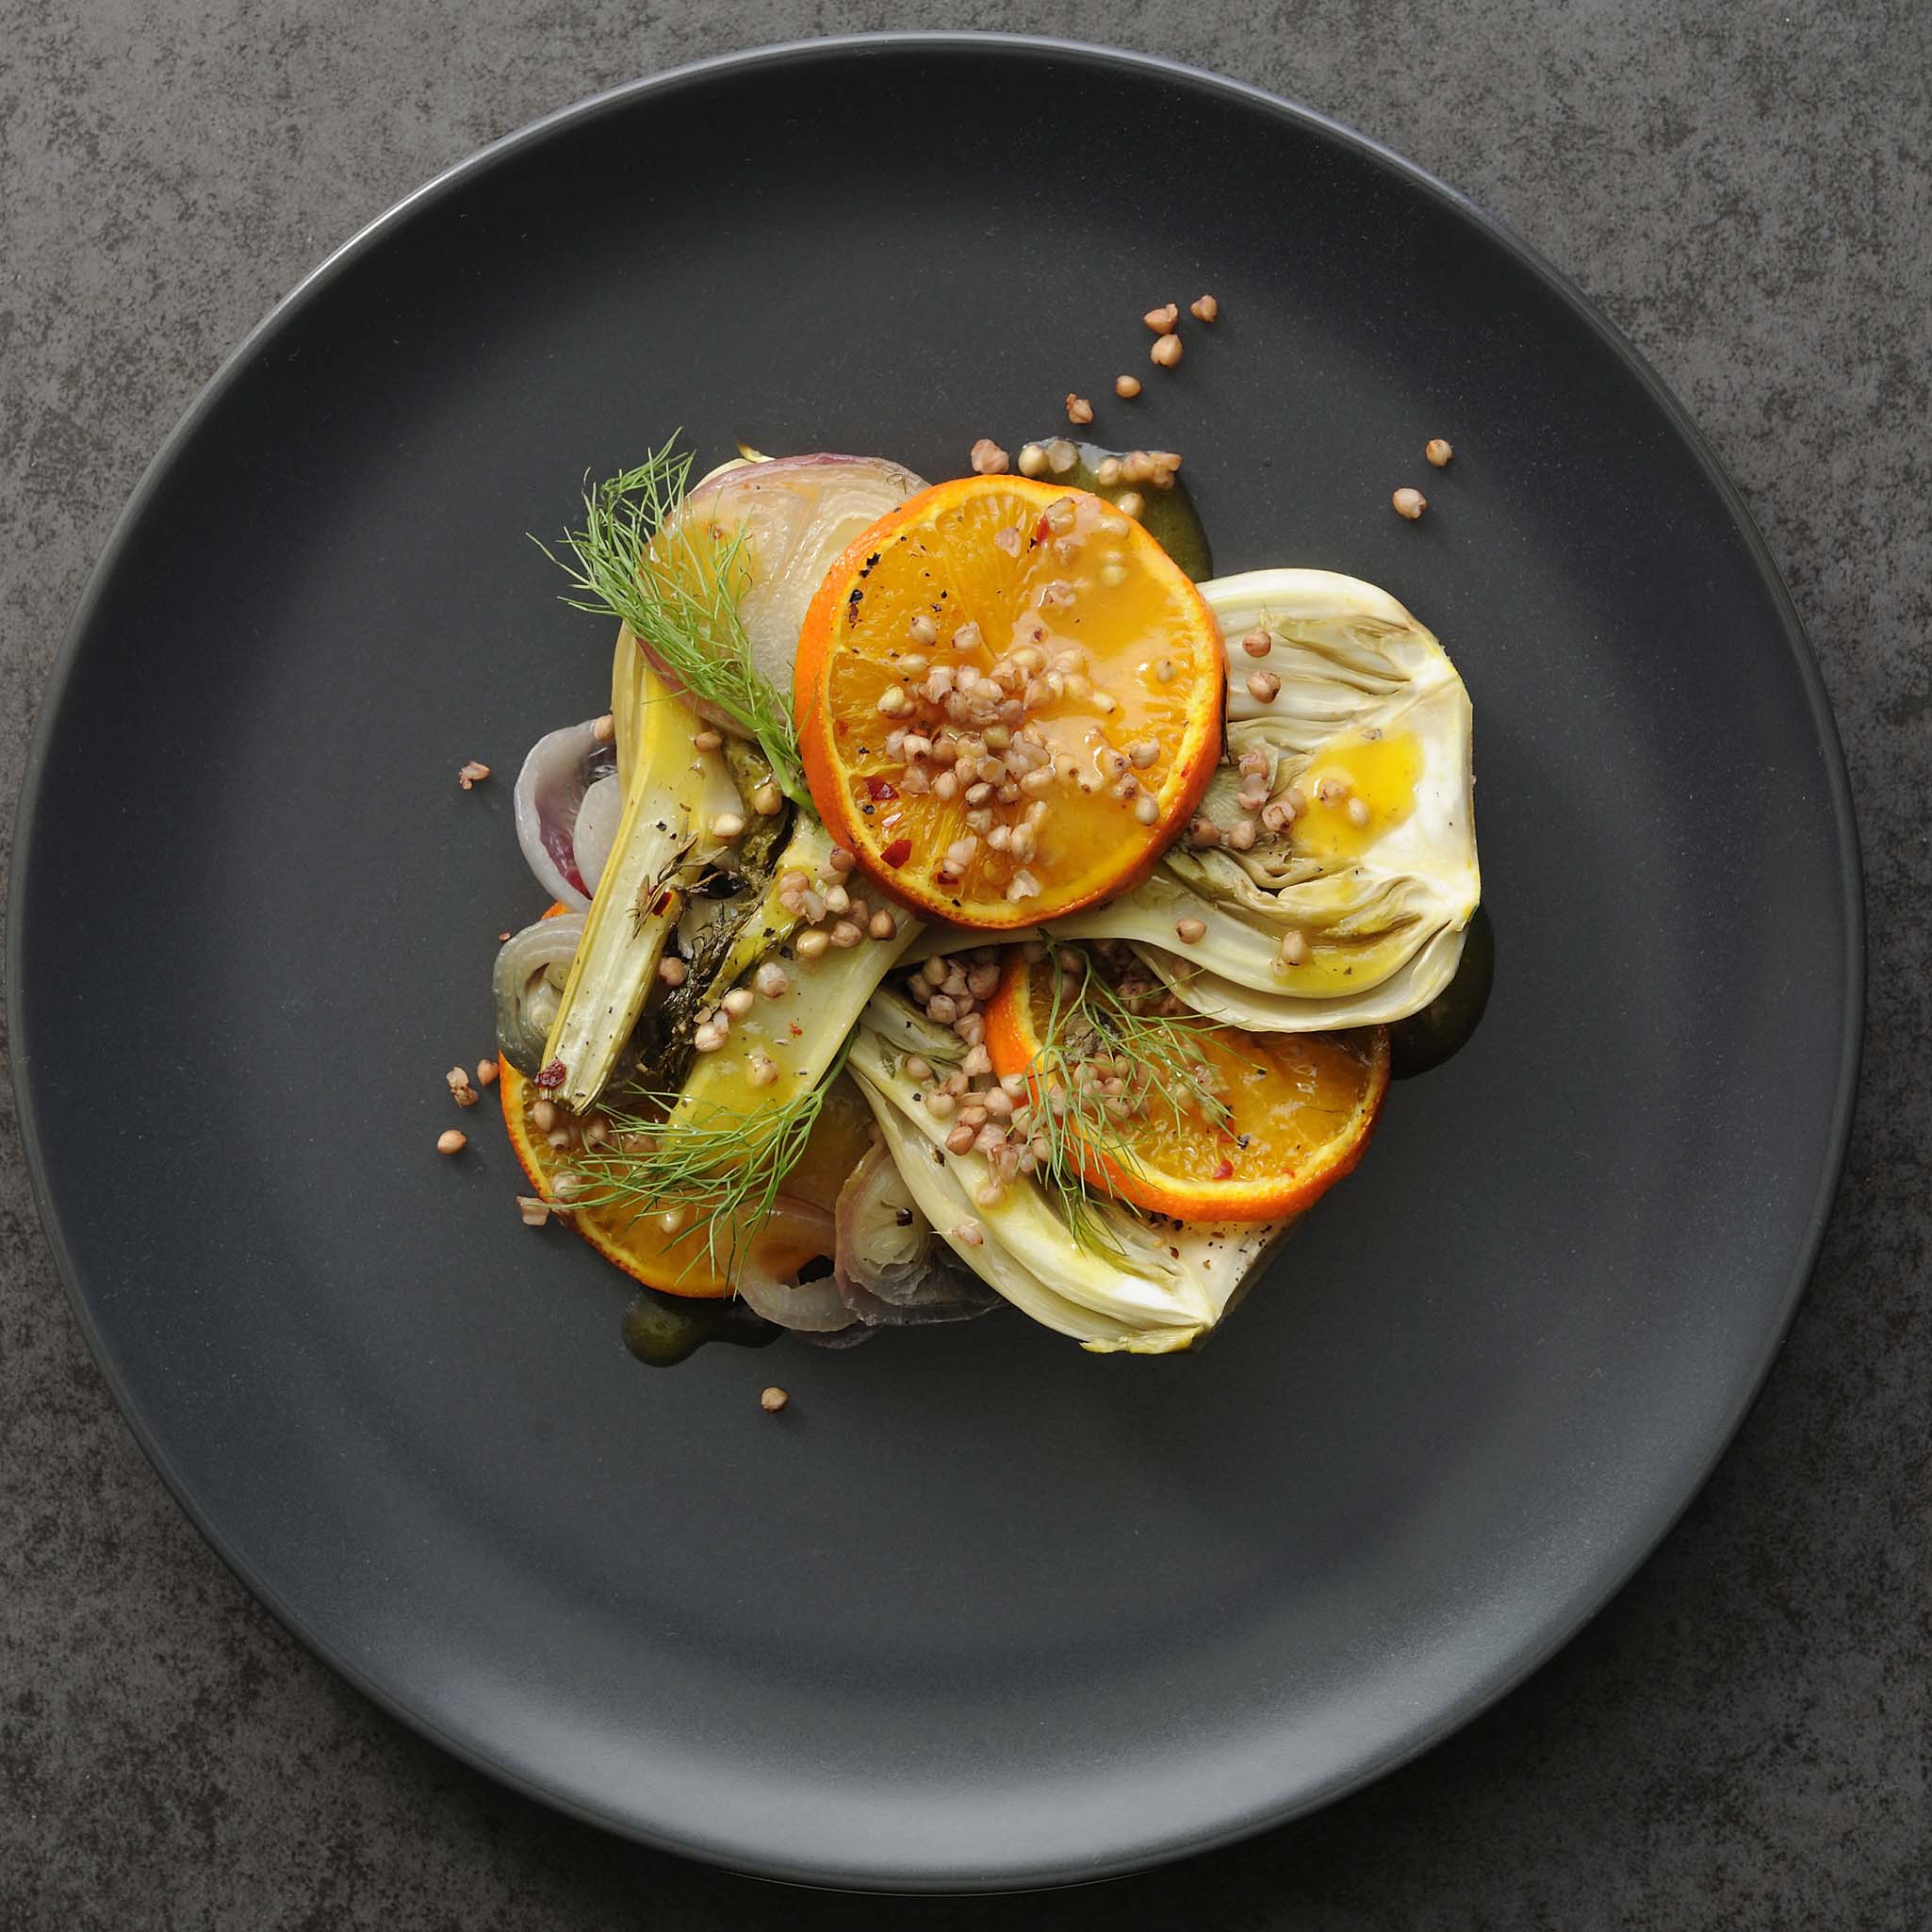 fennel- and clementine slices with clementine-'beurre blanc' with buckwheat